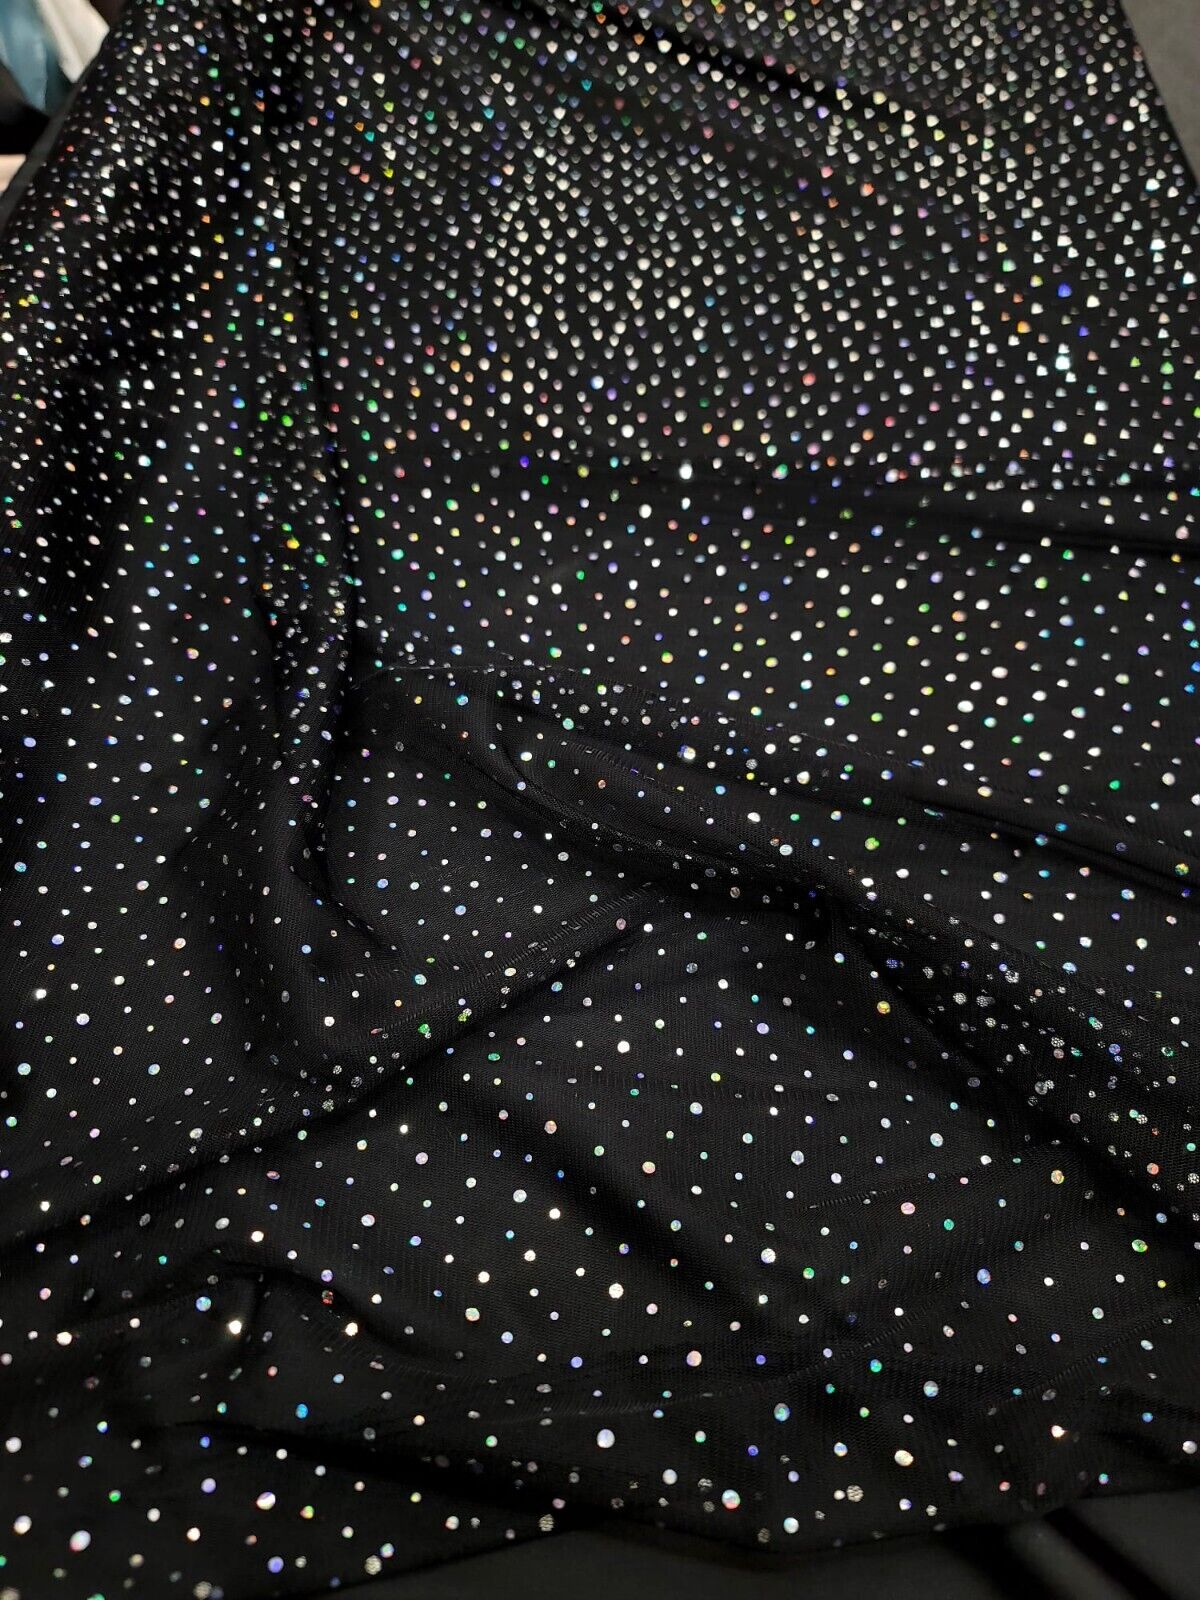 Black Stretch Mesh Iridescent Sequins Fabric Sold By The Yard Quinceañera Prom